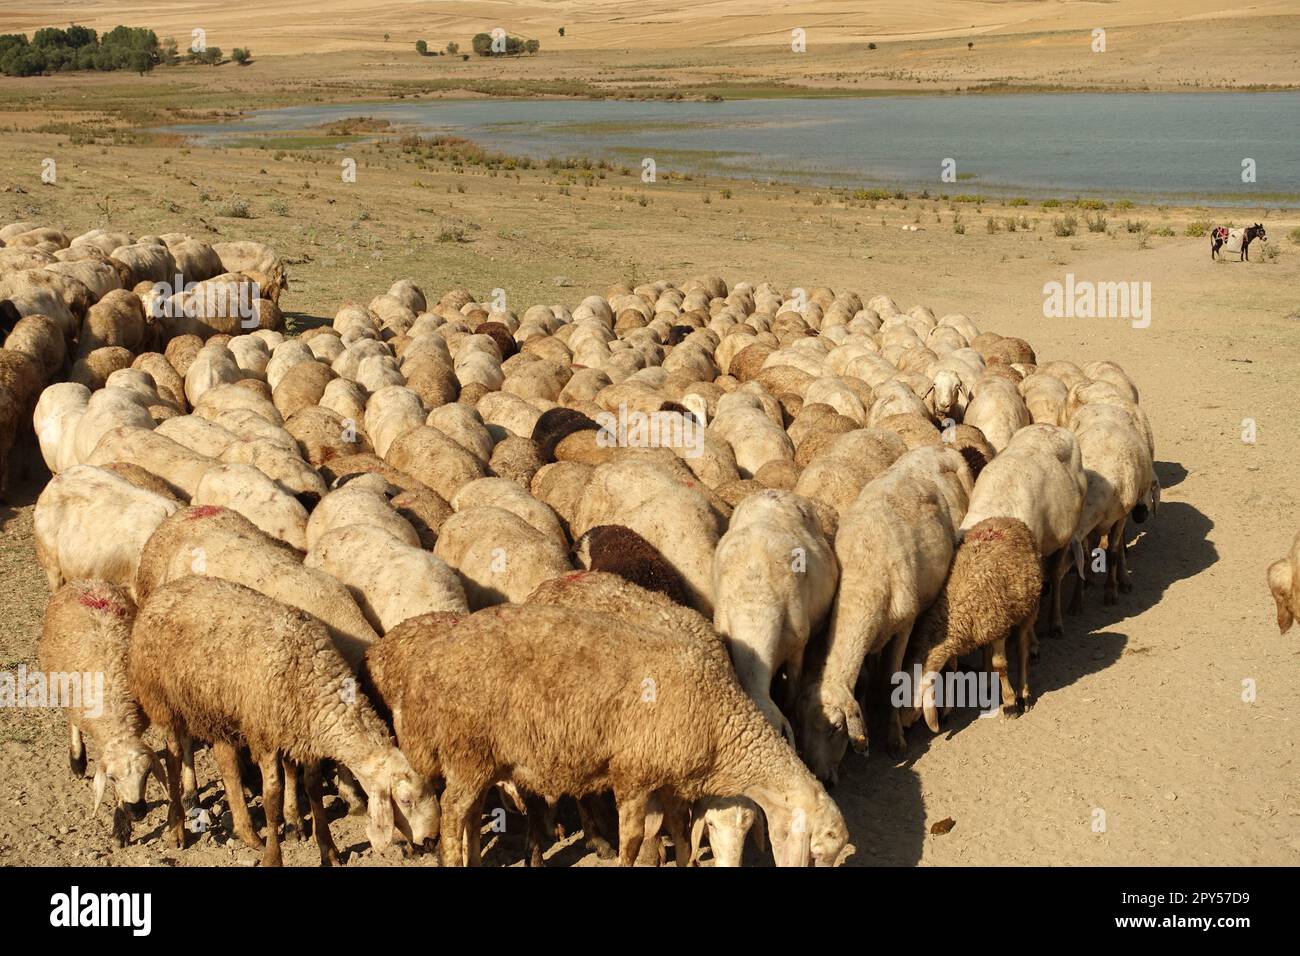 the flock of sheep, overwhelmed by the heat, came close to each other, flock of sheep taken to drink water Stock Photo